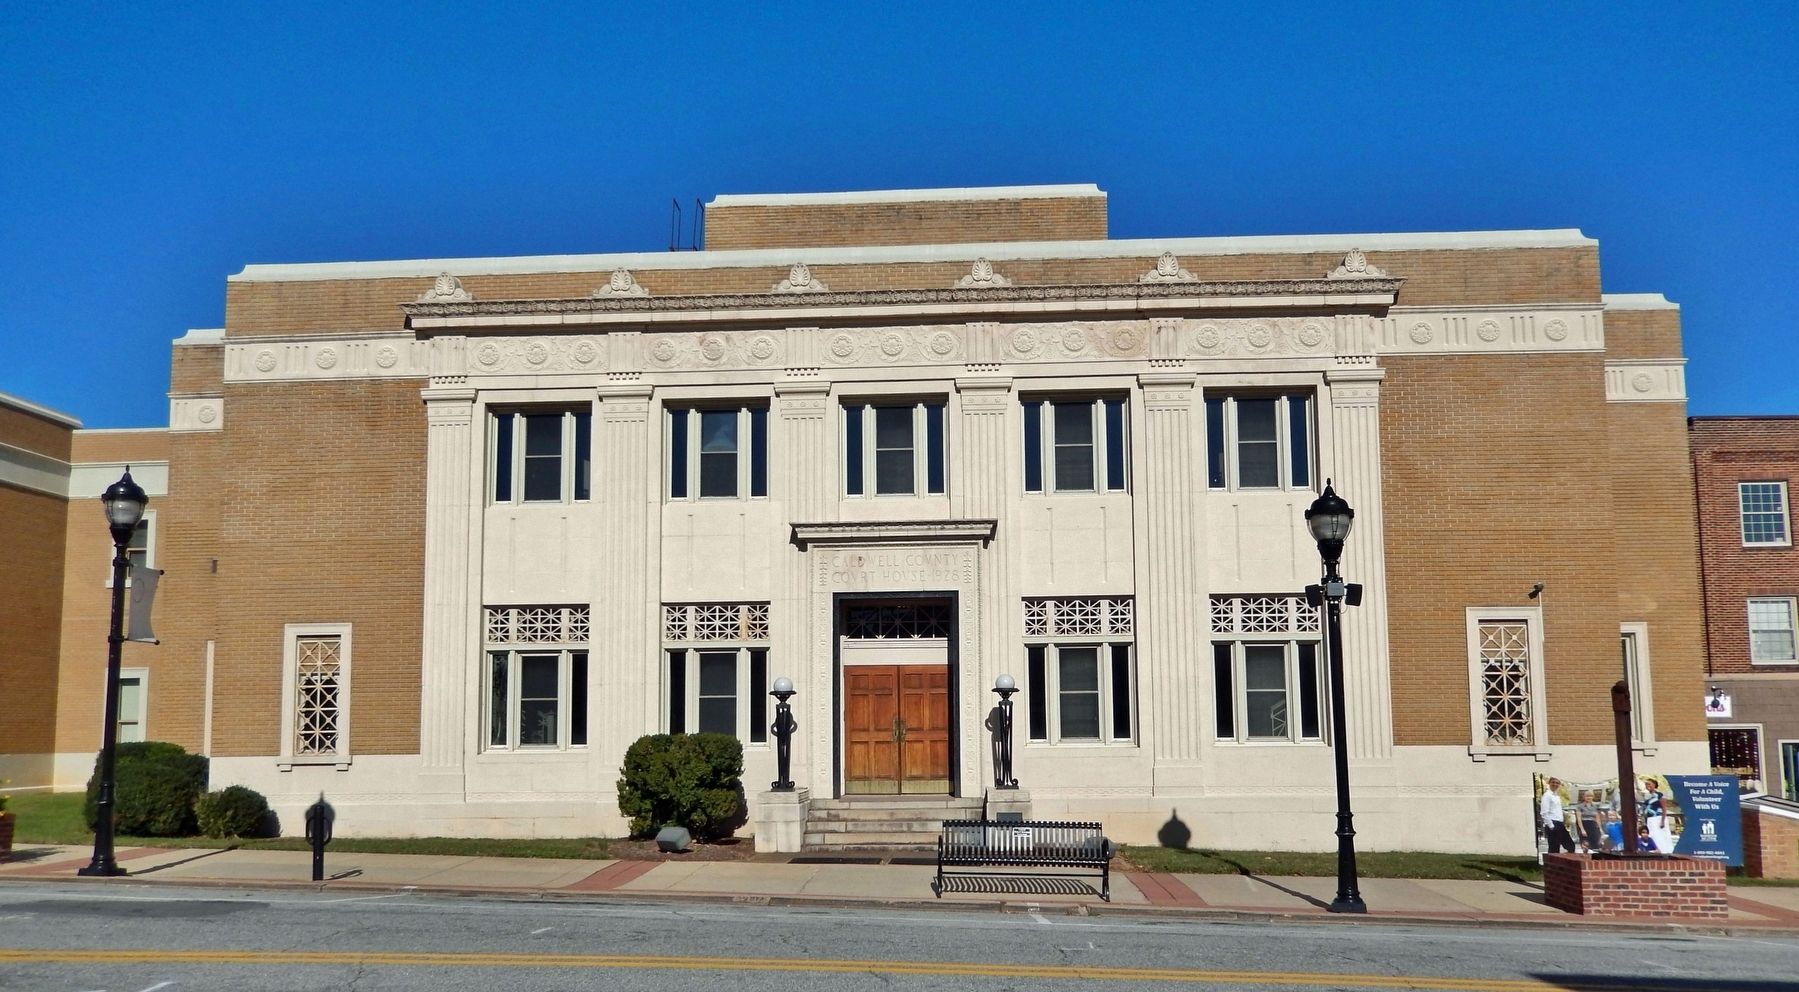 Caldwell County Courthouse (<i>west/front elevation</i>) image. Click for full size.